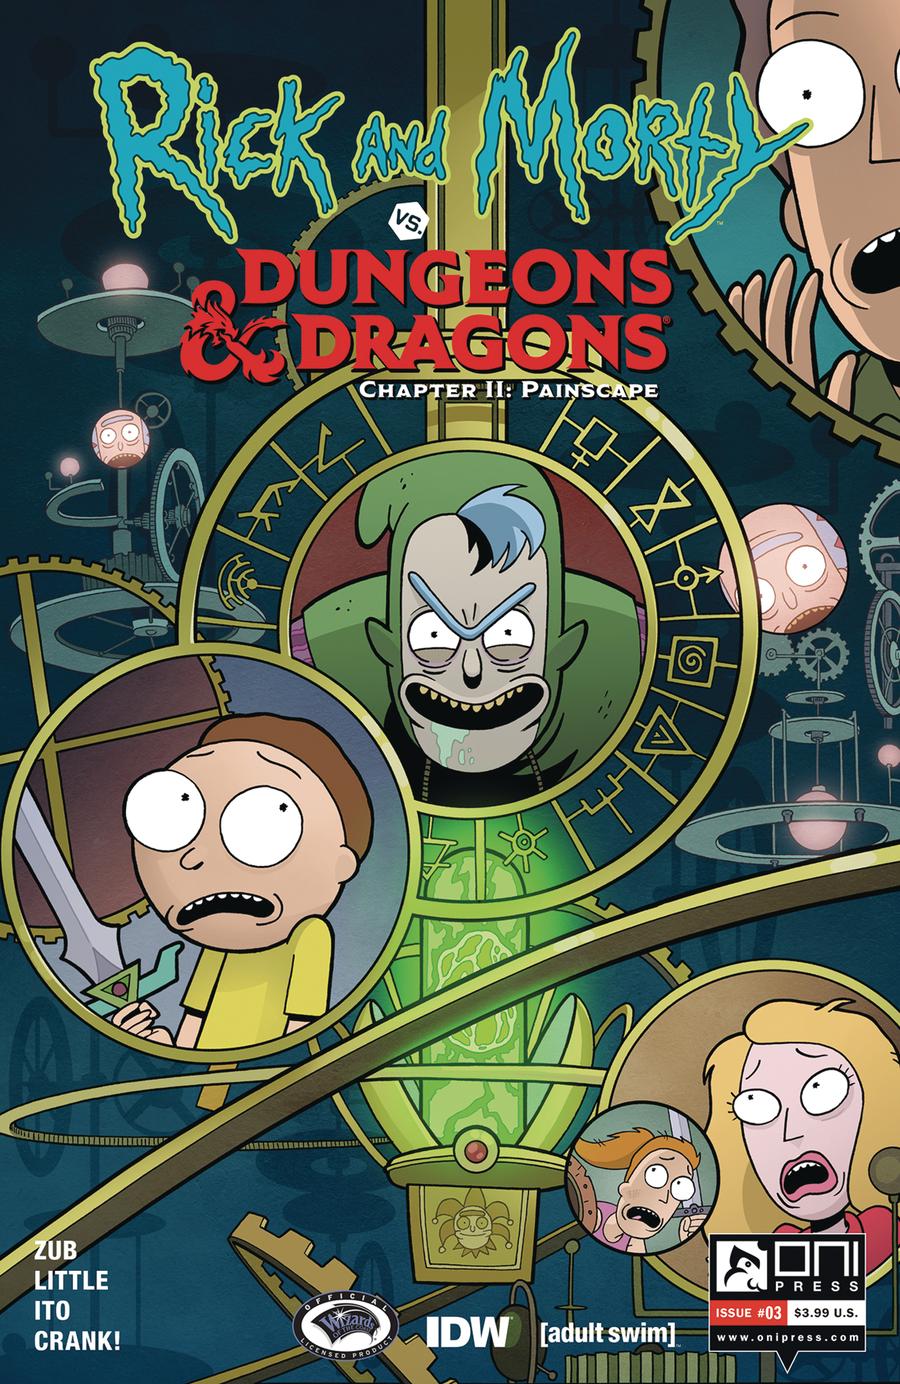 Rick And Morty vs Dungeons & Dragons Chapter II Painscape #3 Cover A Regular Troy Little Cover